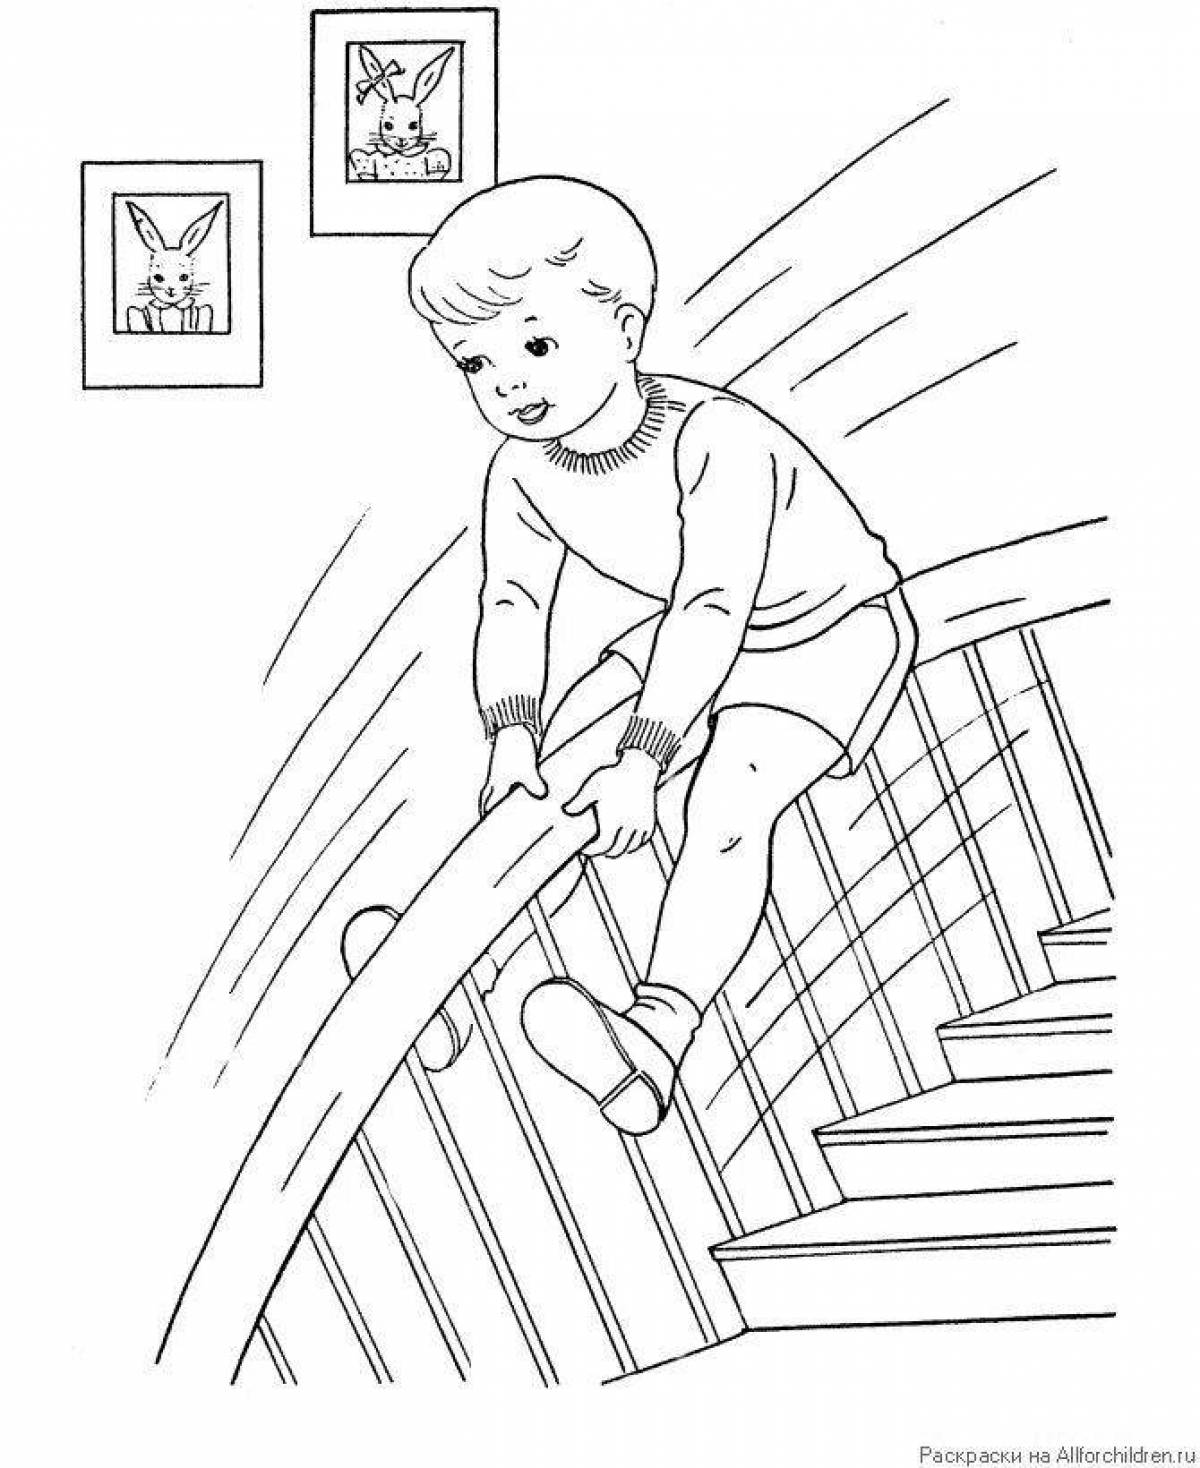 Innovation safety coloring book for preschoolers